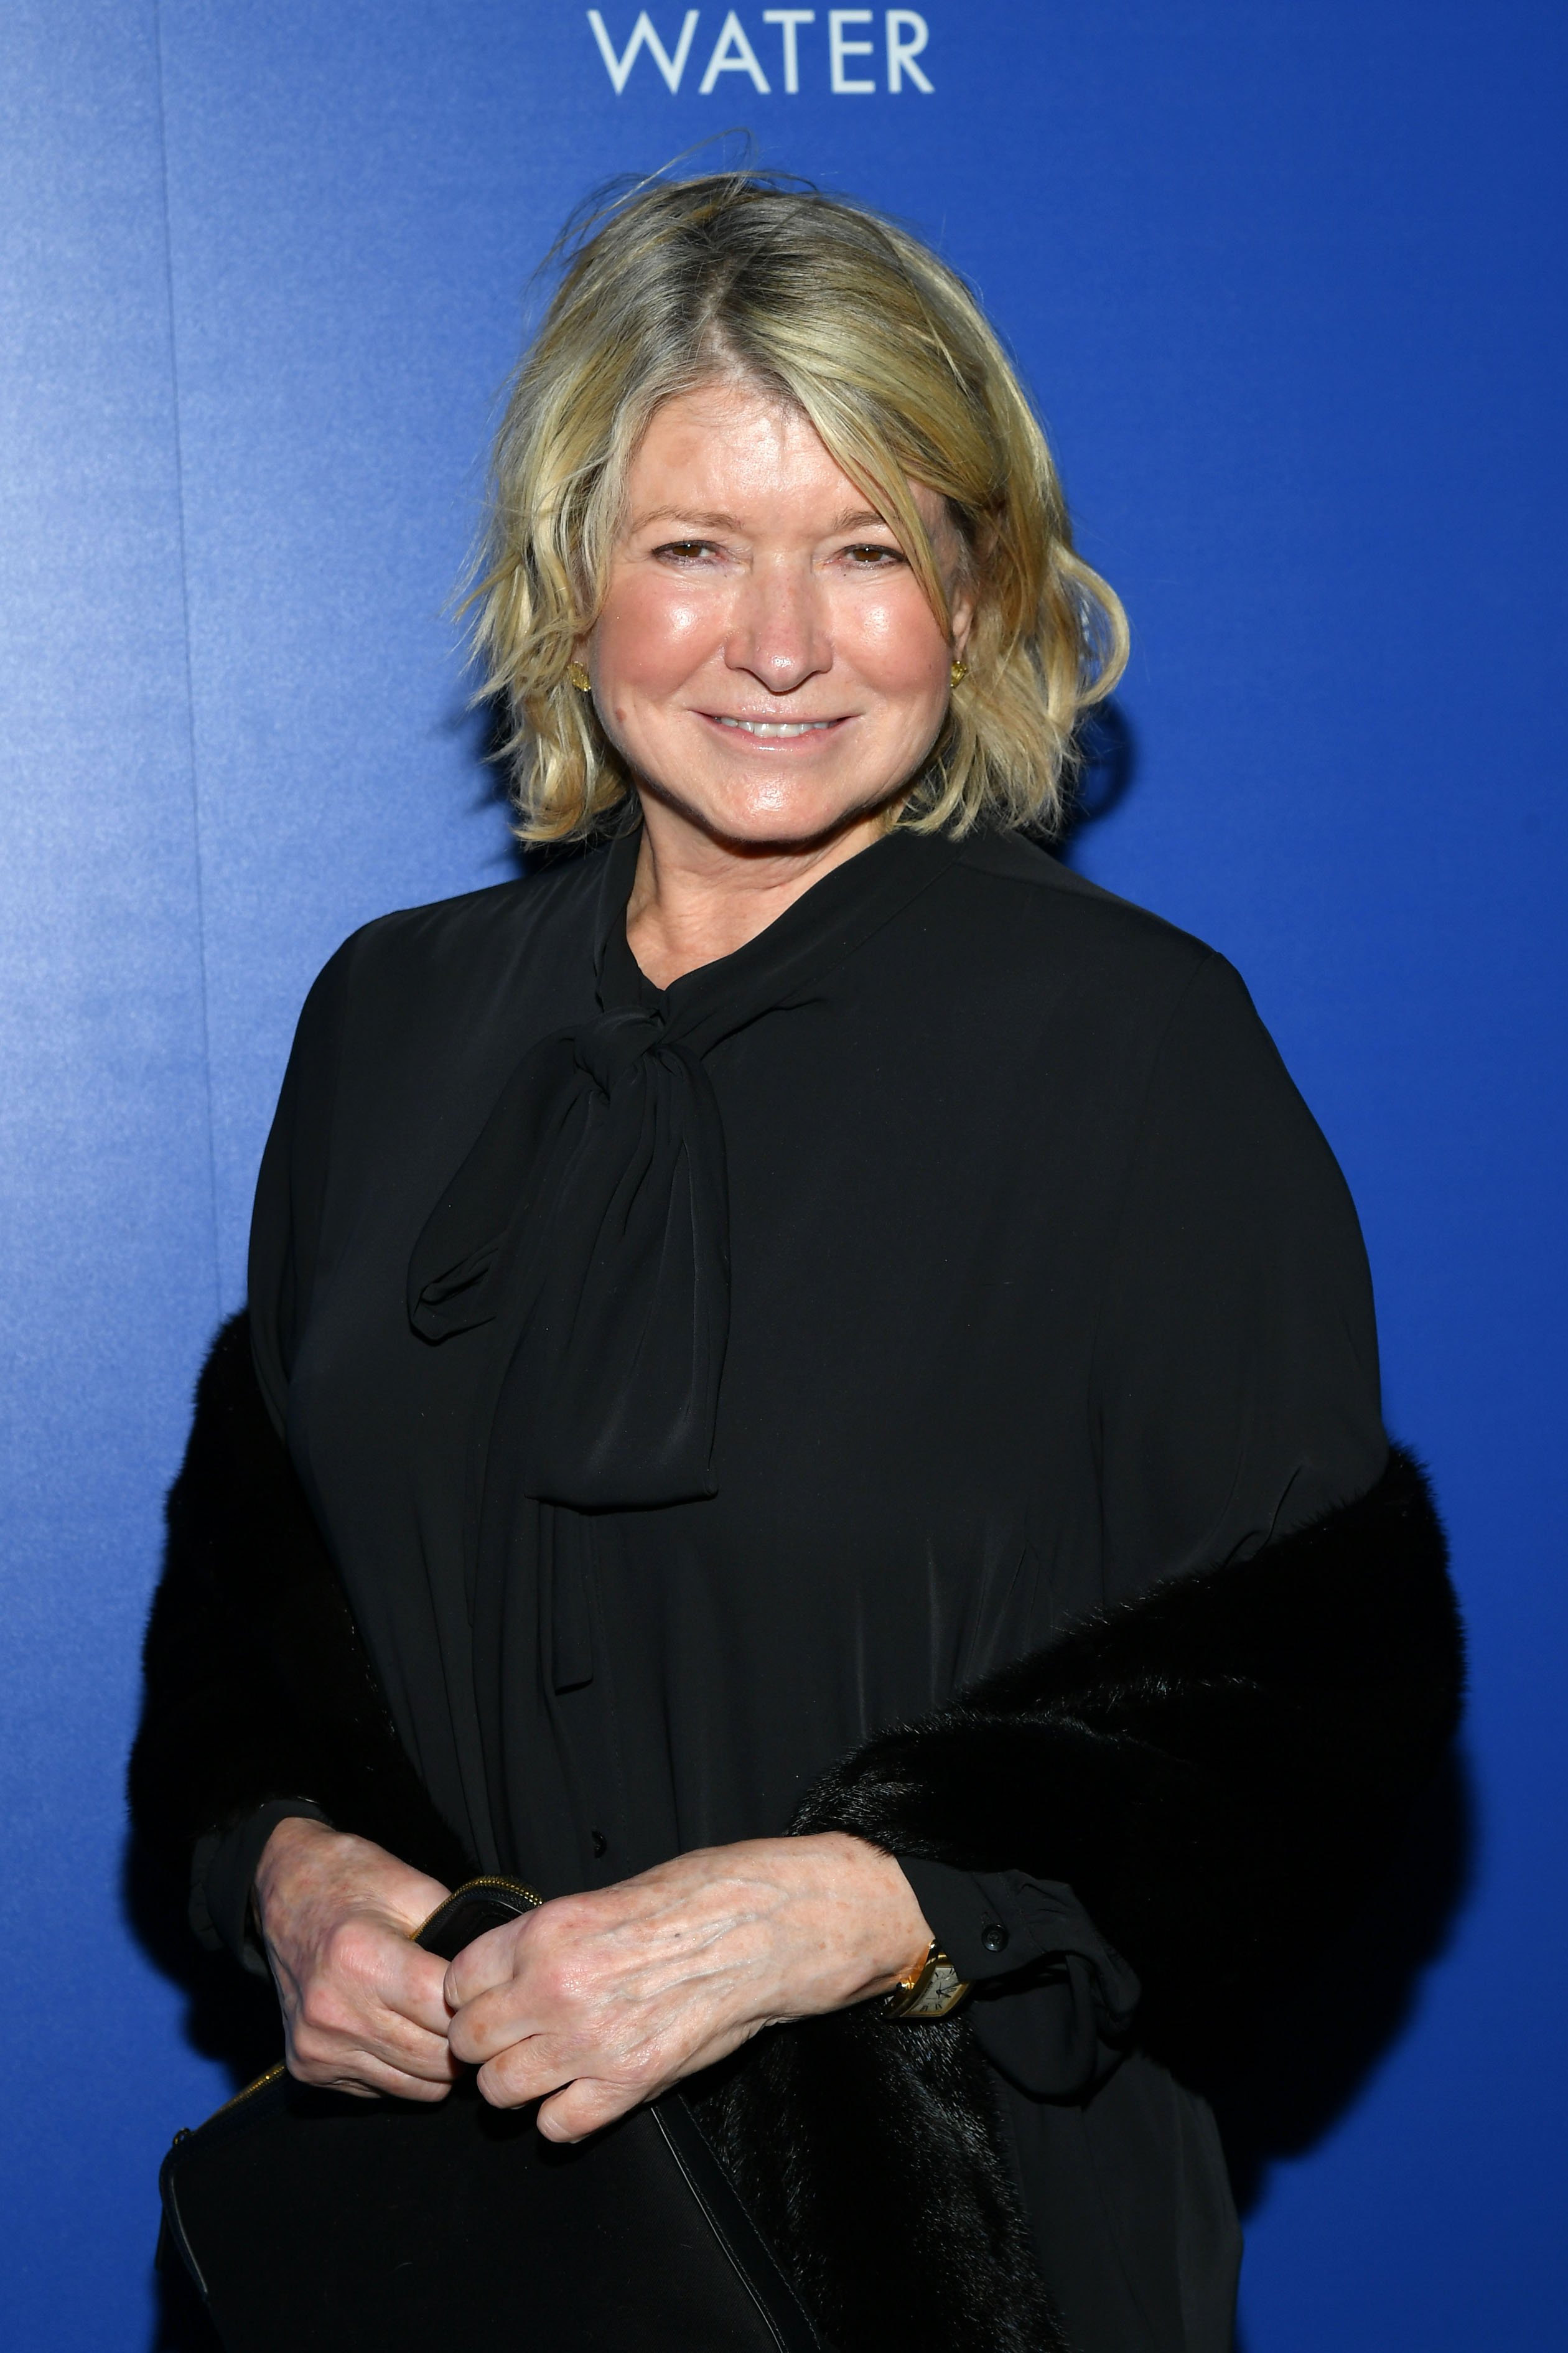 Martha Stewart attends the "Mary Poppins Returns" on December 17, 2018, in New York City | Source: Getty Images